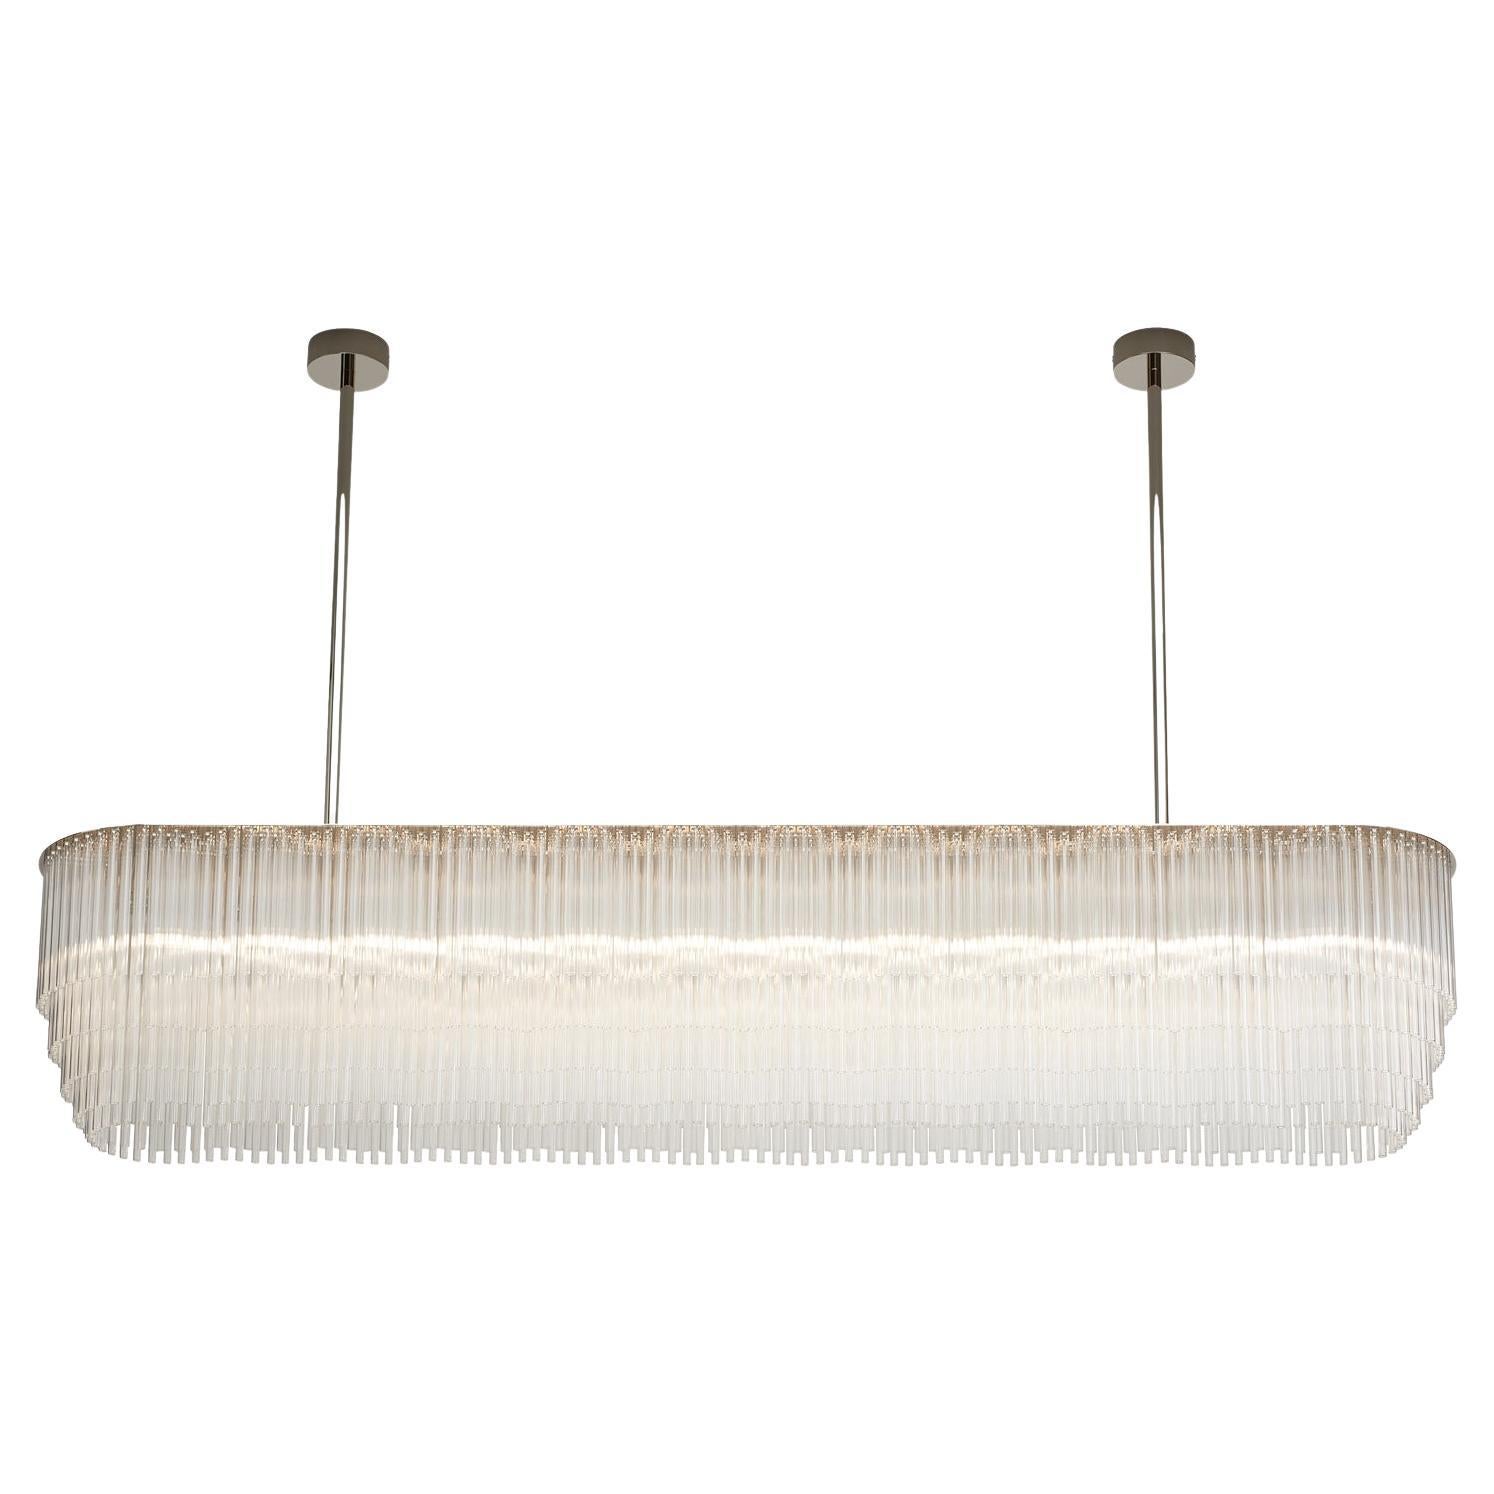 Linear Chandelier 1479mm / 58.25" in Polished Nickel with Tiered Glass Profile